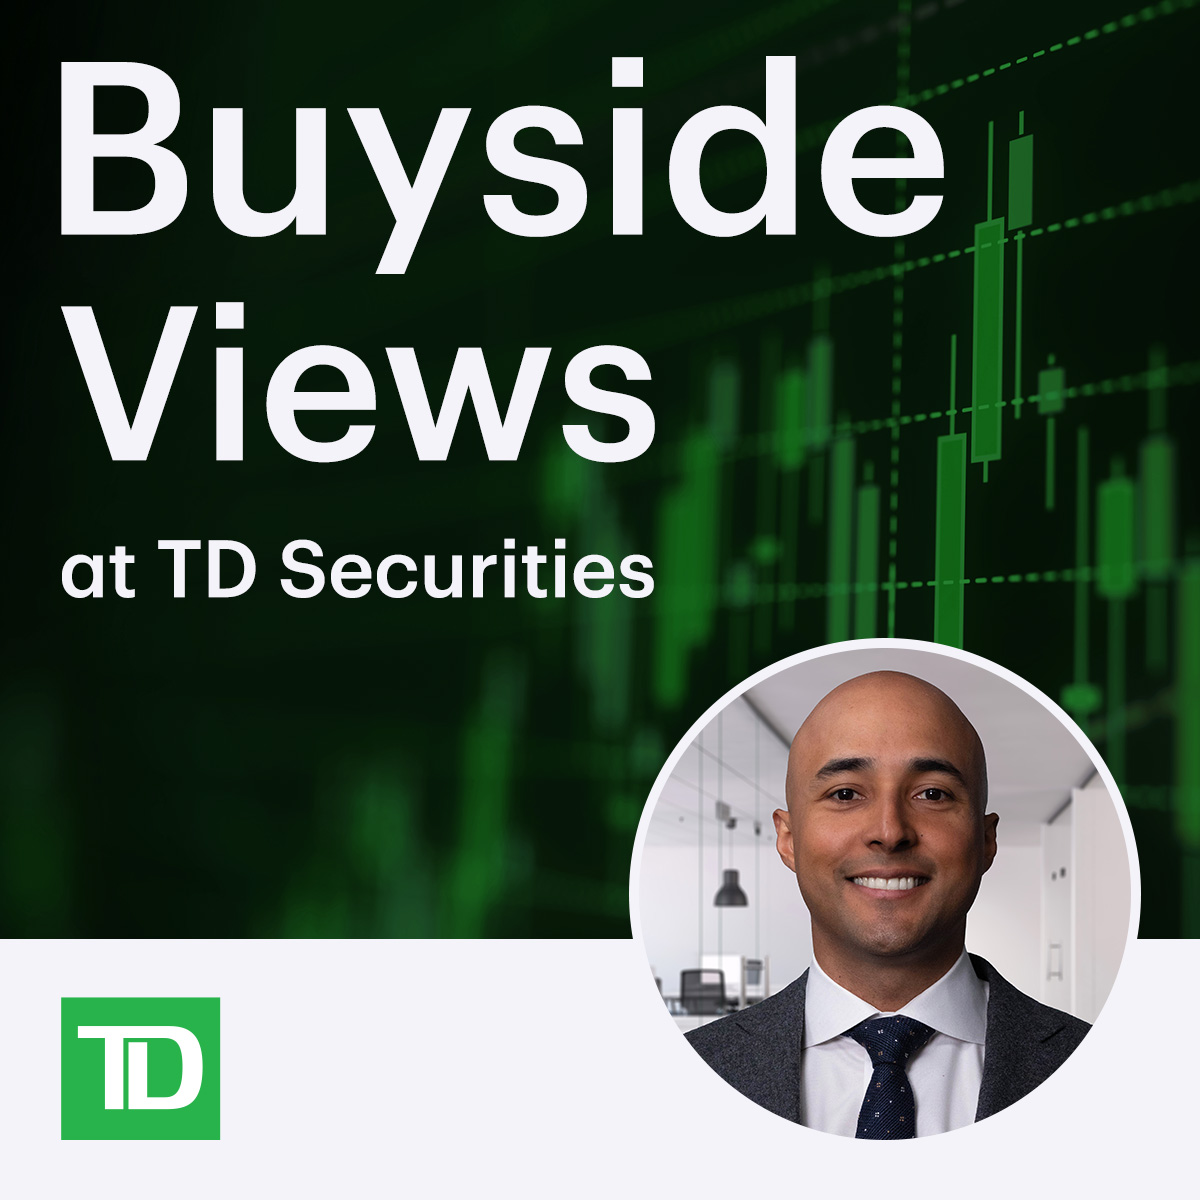 Buyside Views podcast title card